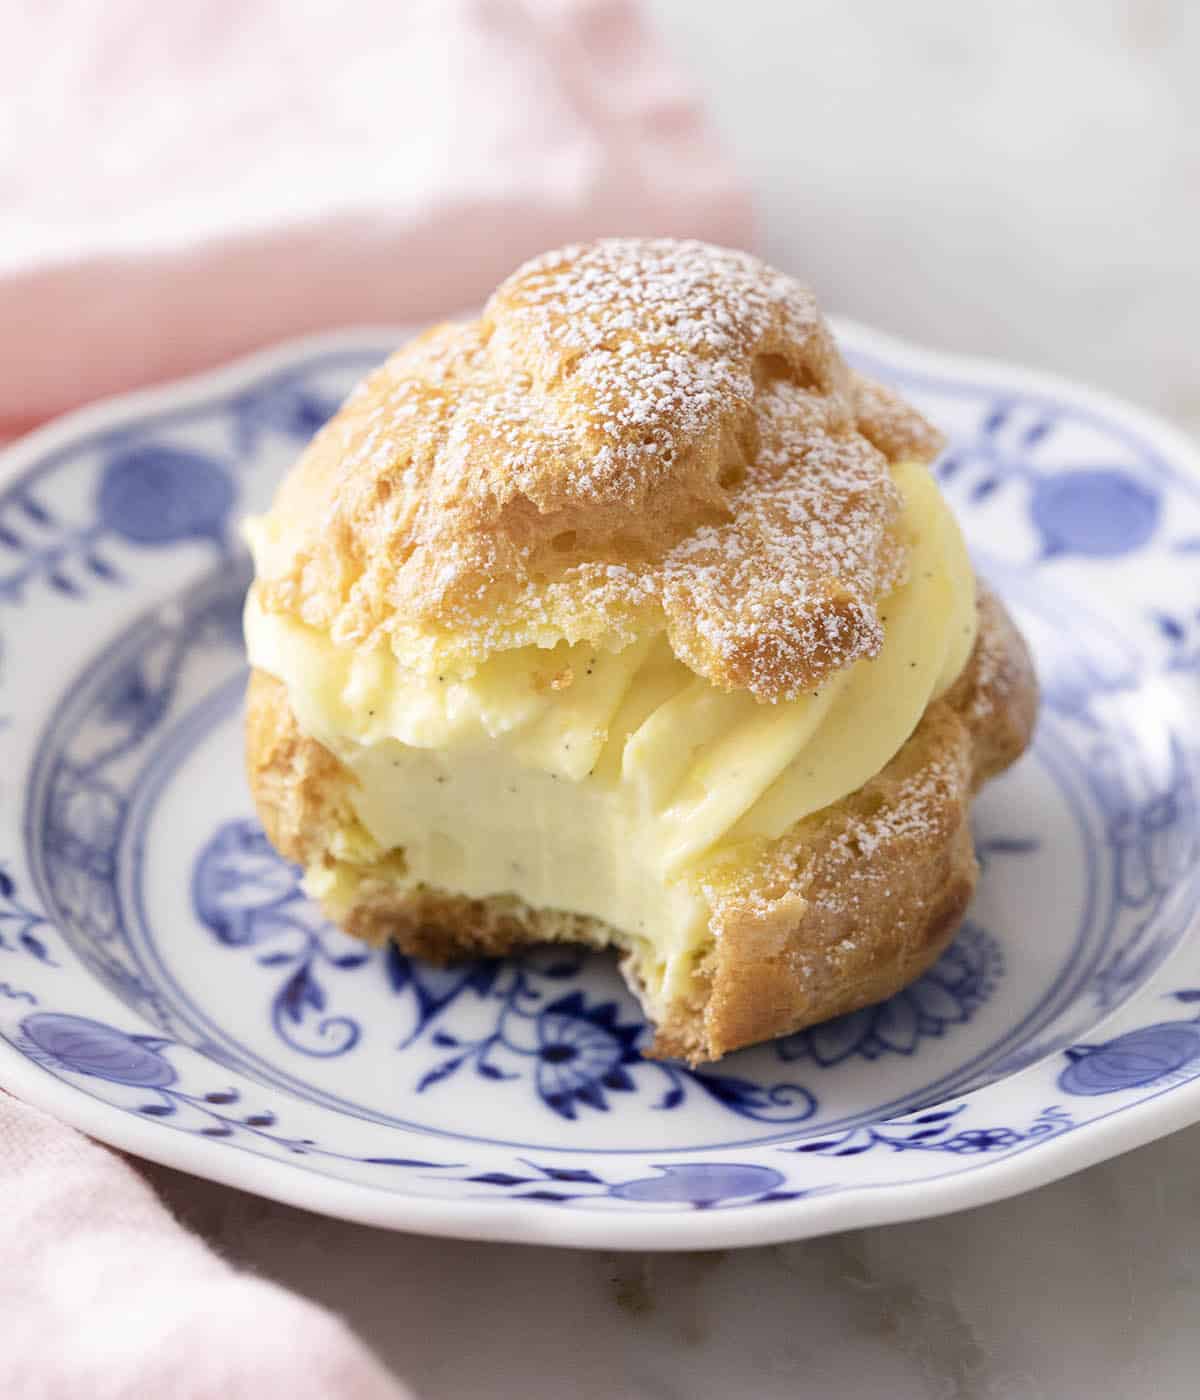 Close up of a cream puff on a plate with a bite taken out.